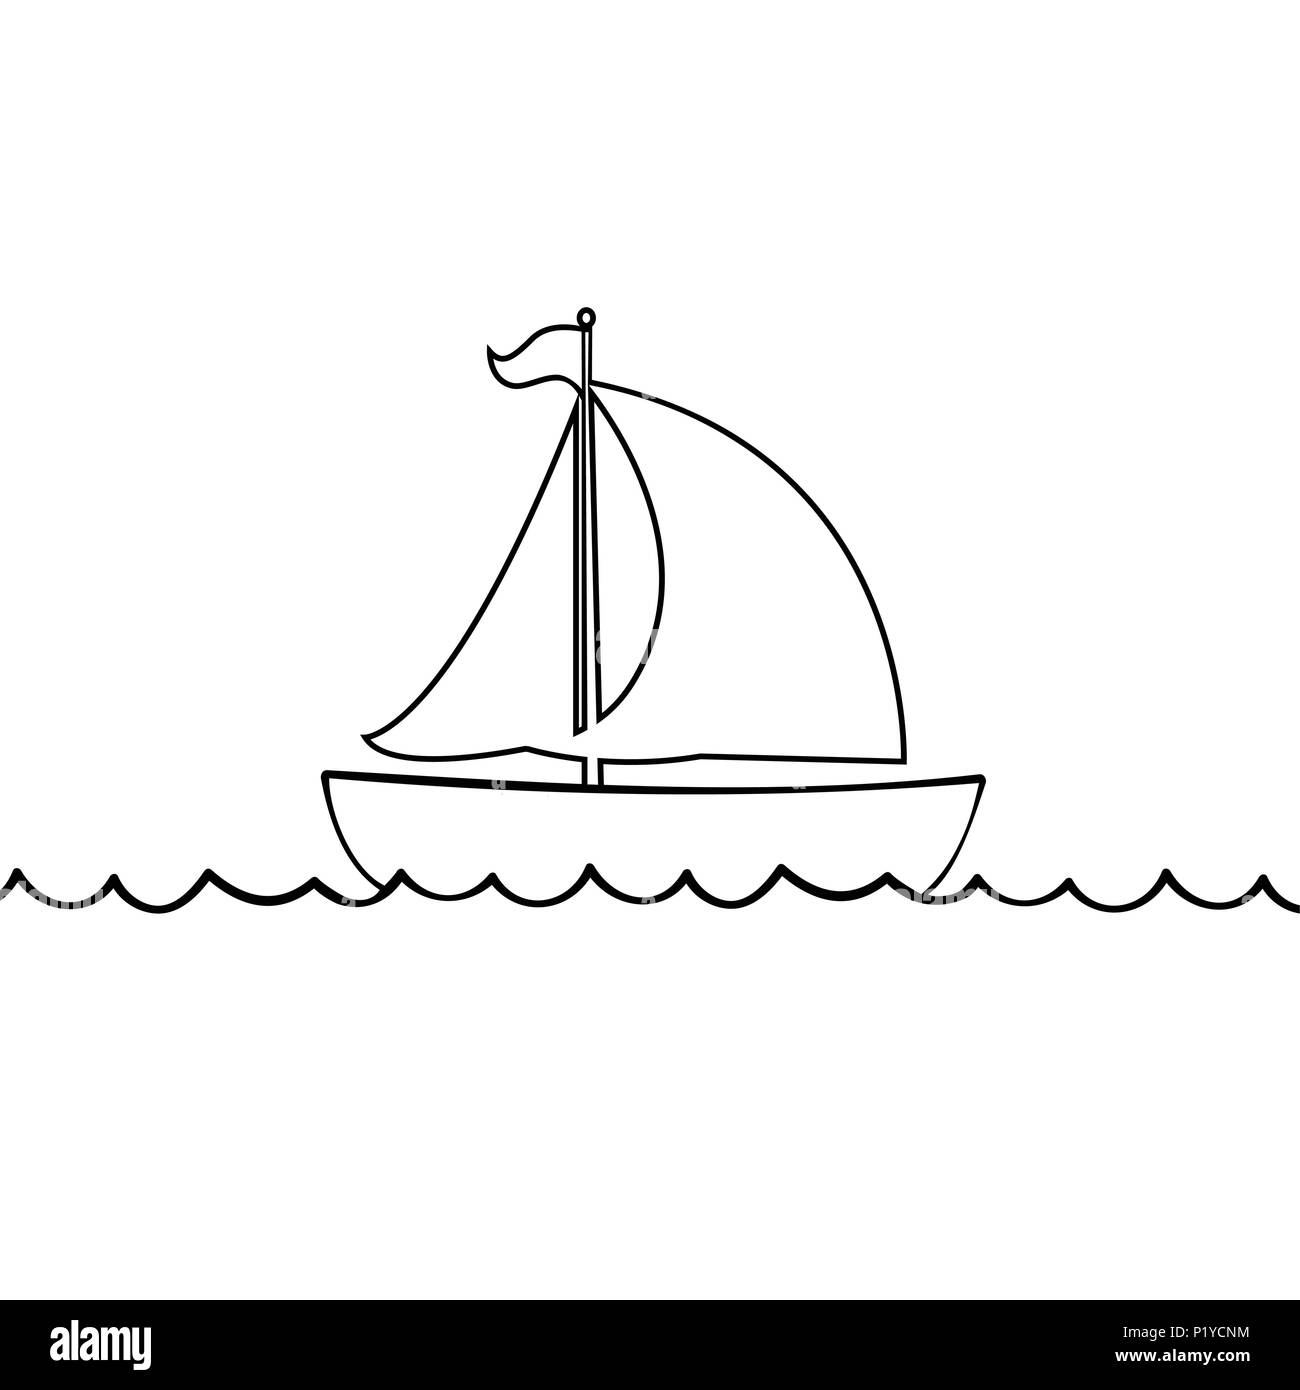 Vector black contour outline silhouette illustration of sailing ship transportation floating on sea waves. Yacht boat icon isolated on white backgroun Stock Vector